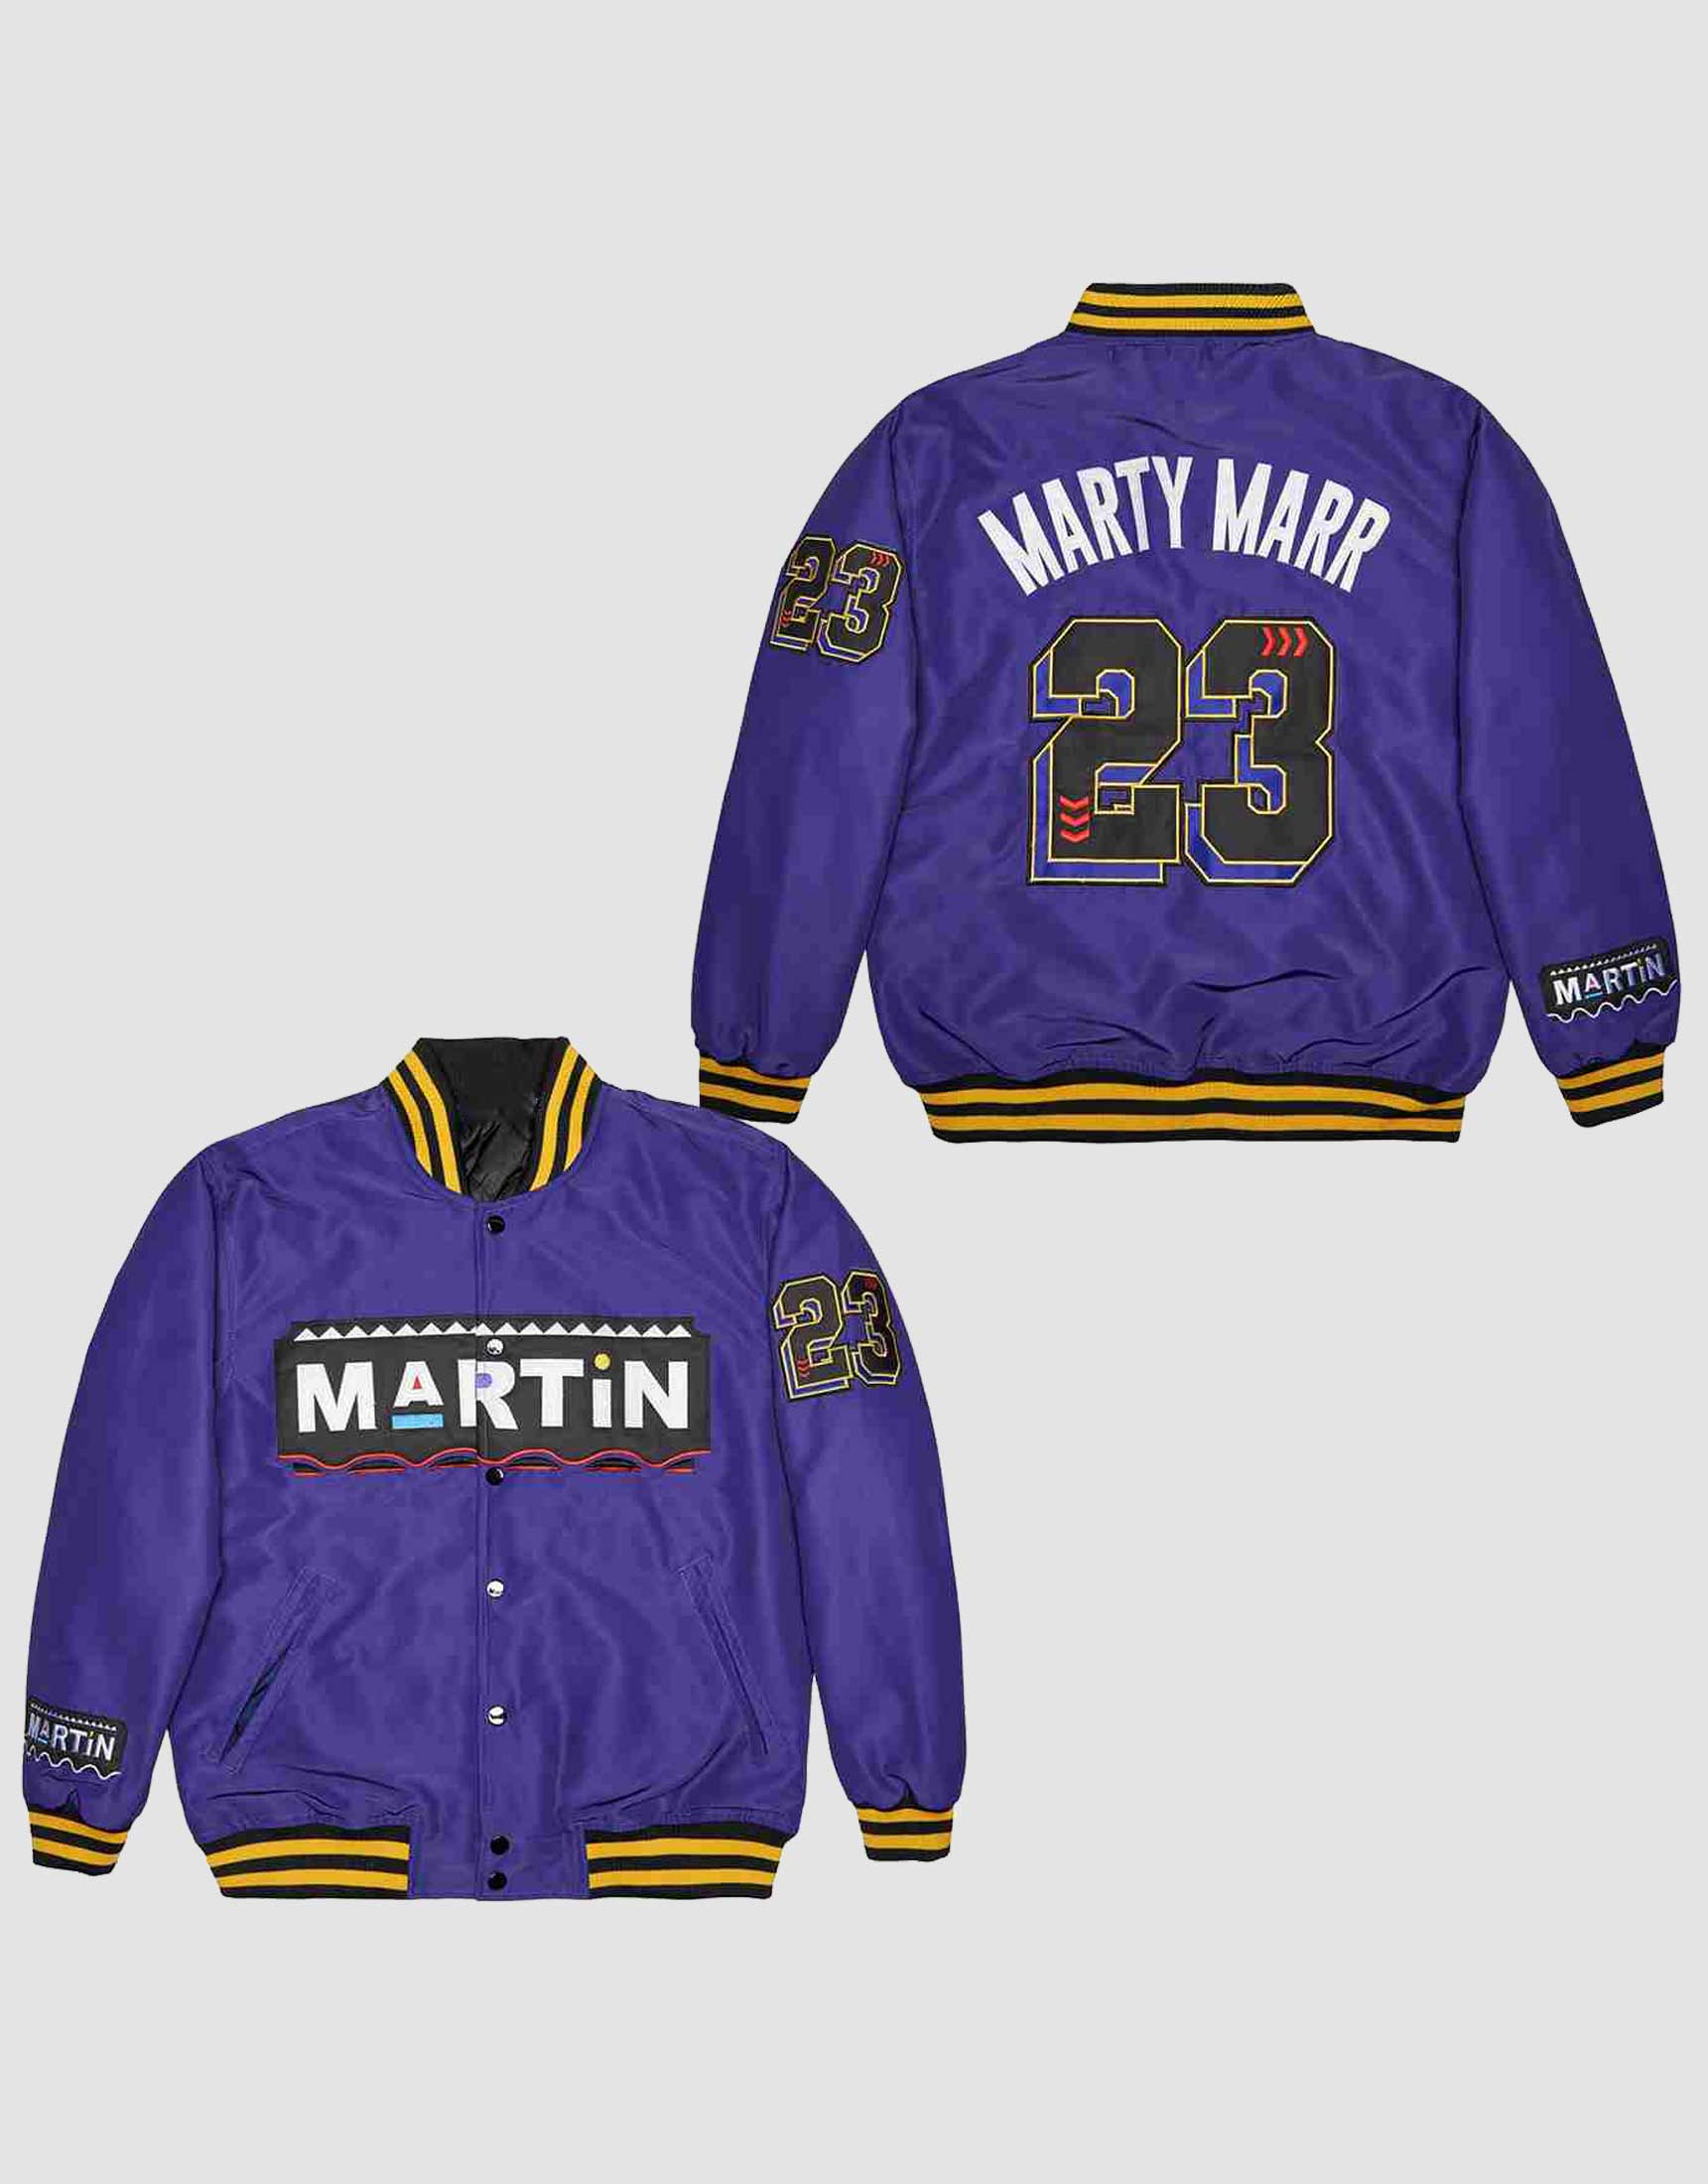 Martin Marty Marr #23 Purple Varsity Jacket – 99Jersey®: Your Ultimate  Destination for Unique Jerseys, Shorts, and More